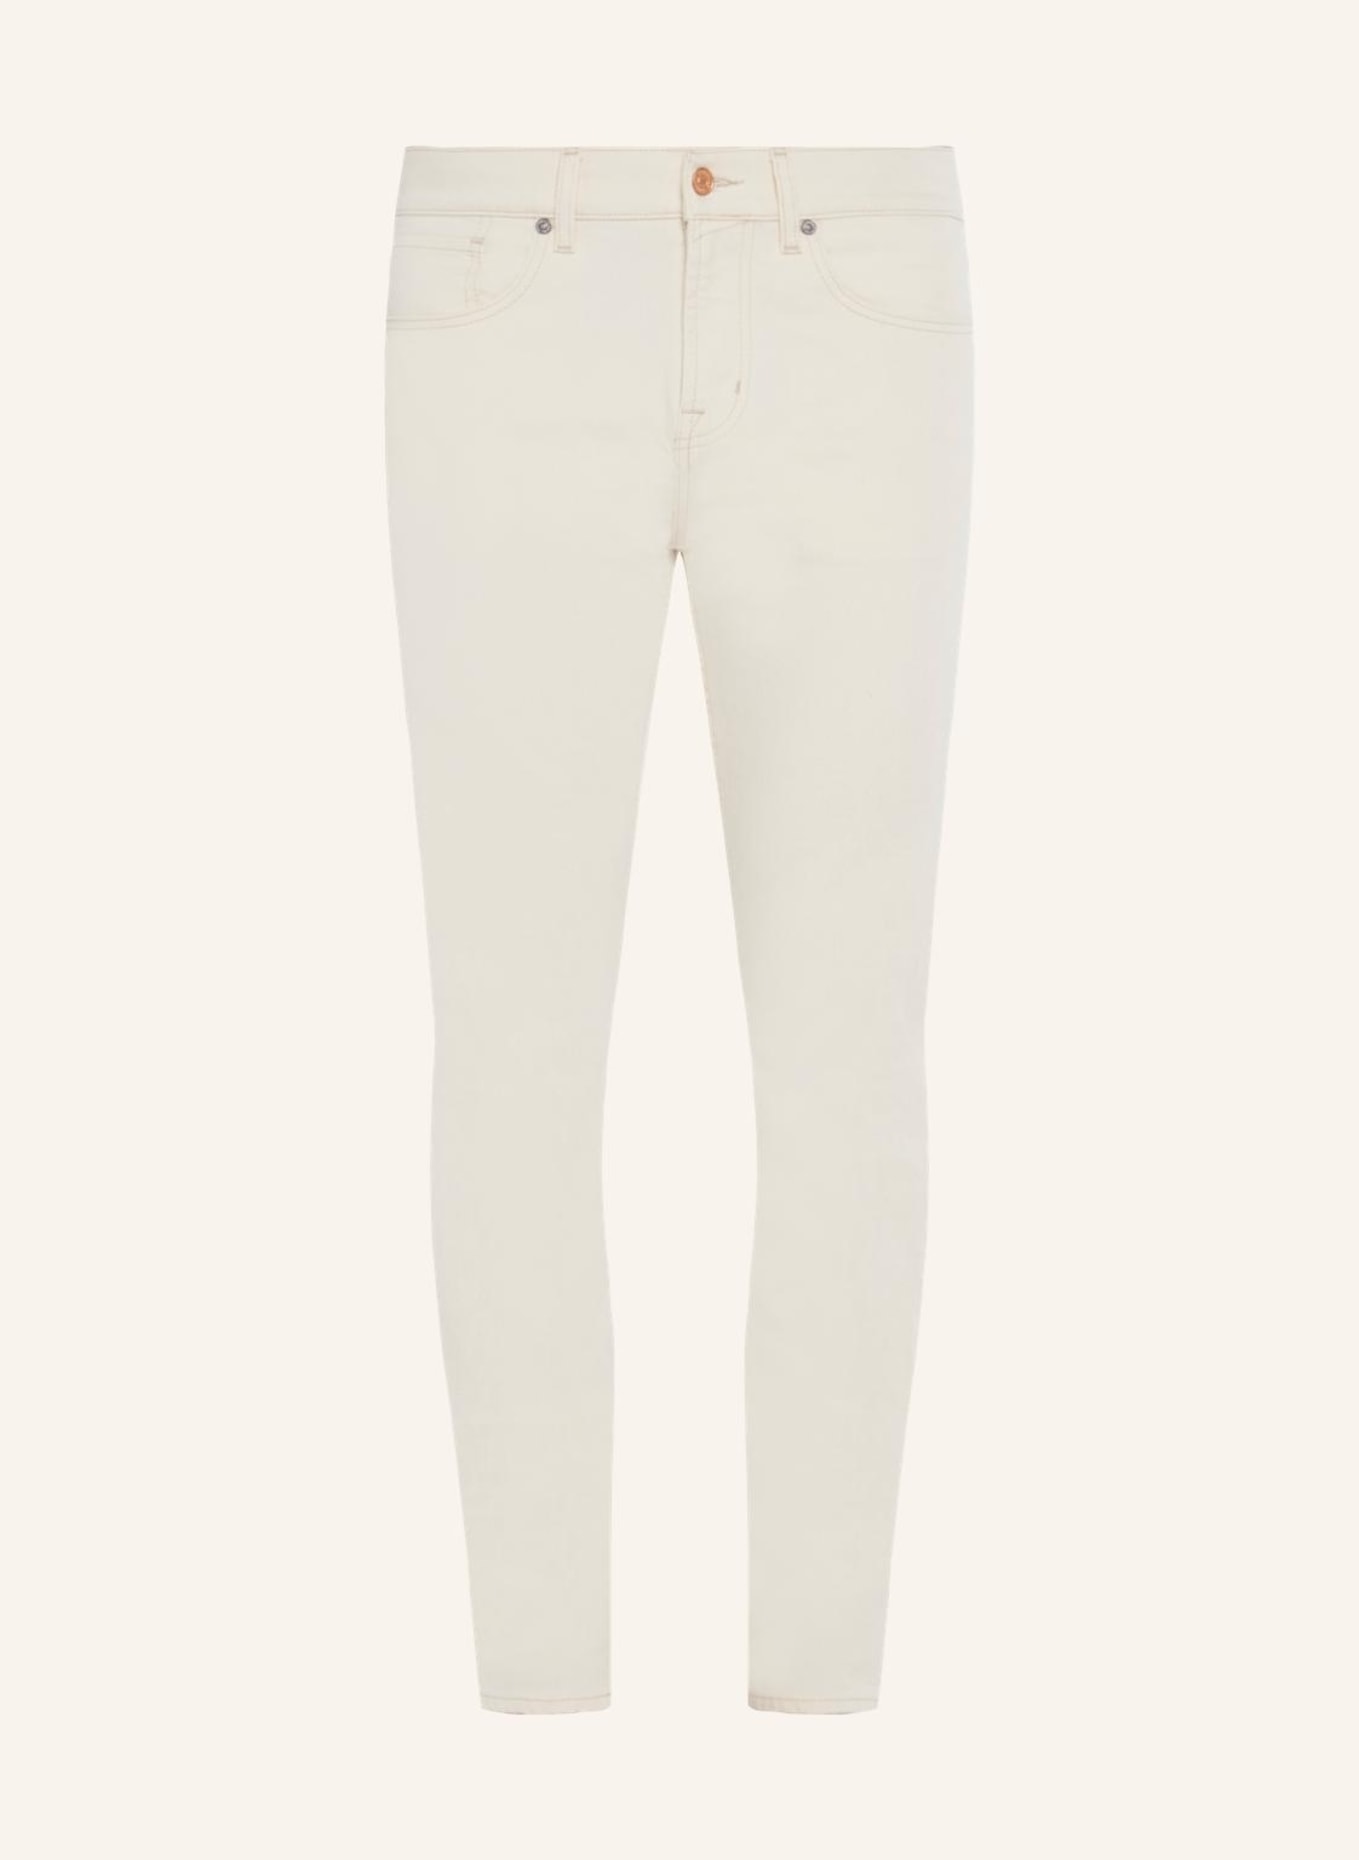 7 for all mankind Jeans SLIMMY Slim fit, Farbe: WEISS (Bild 1)